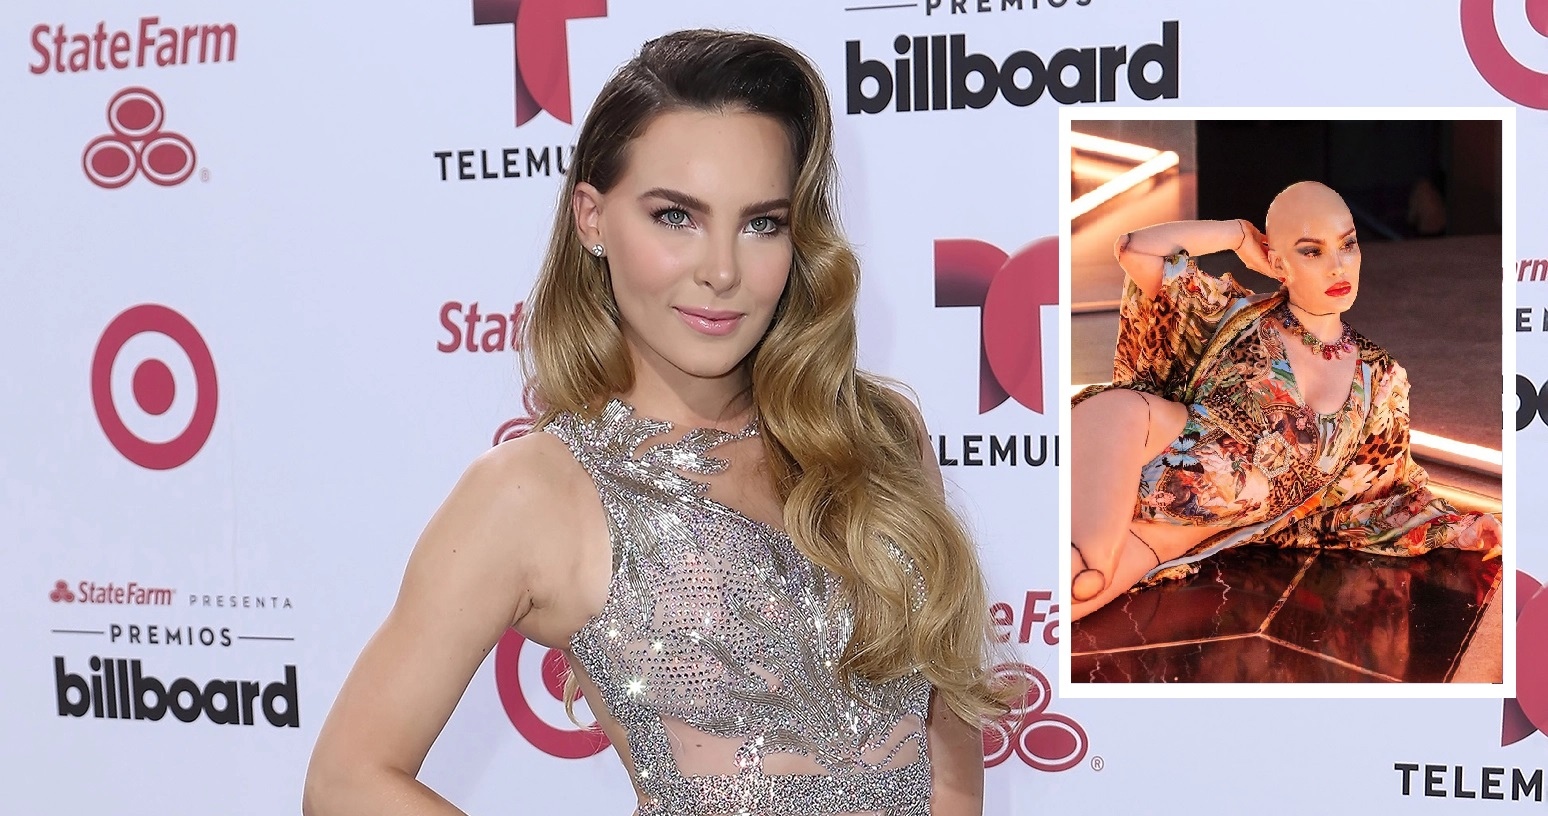 Belinda surprises with a new look in which she looks completely bald